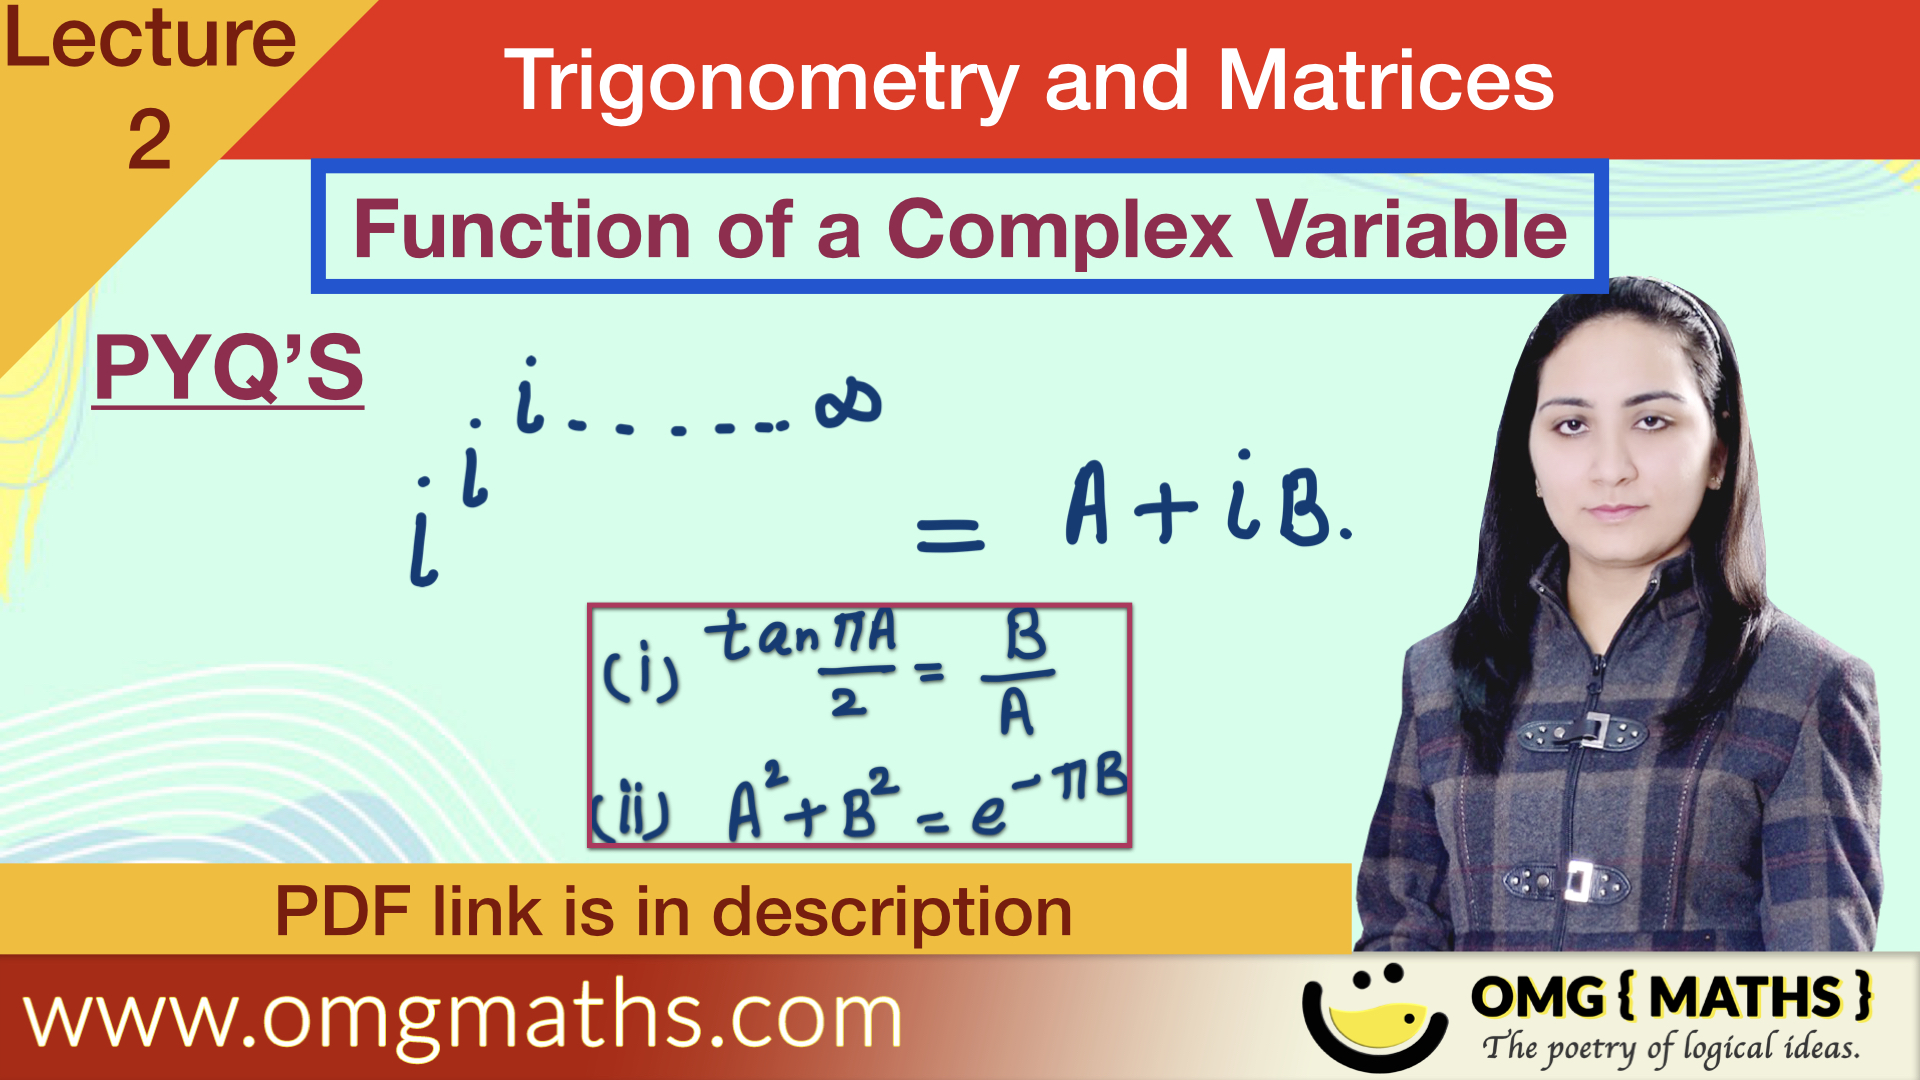 i^i^i^i….infinity = A+iB | Function of a complex variable | pyq | Bsc | Trigonometry and Matrices